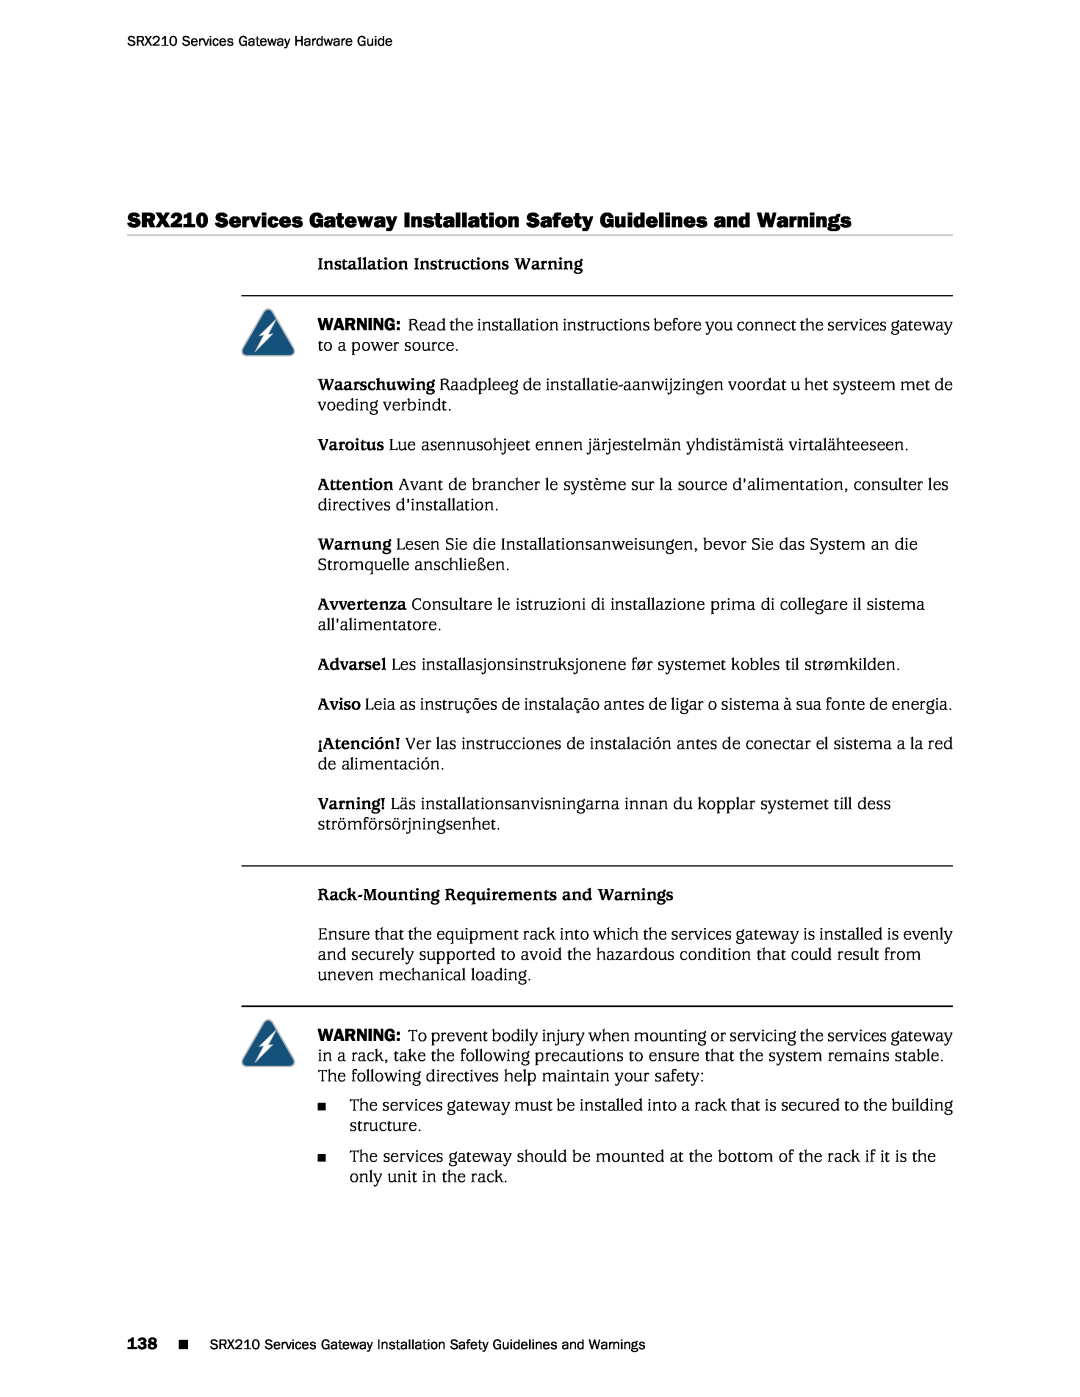 Juniper Networks SRX 210 manual SRX210 Services Gateway Installation Safety Guidelines and Warnings 